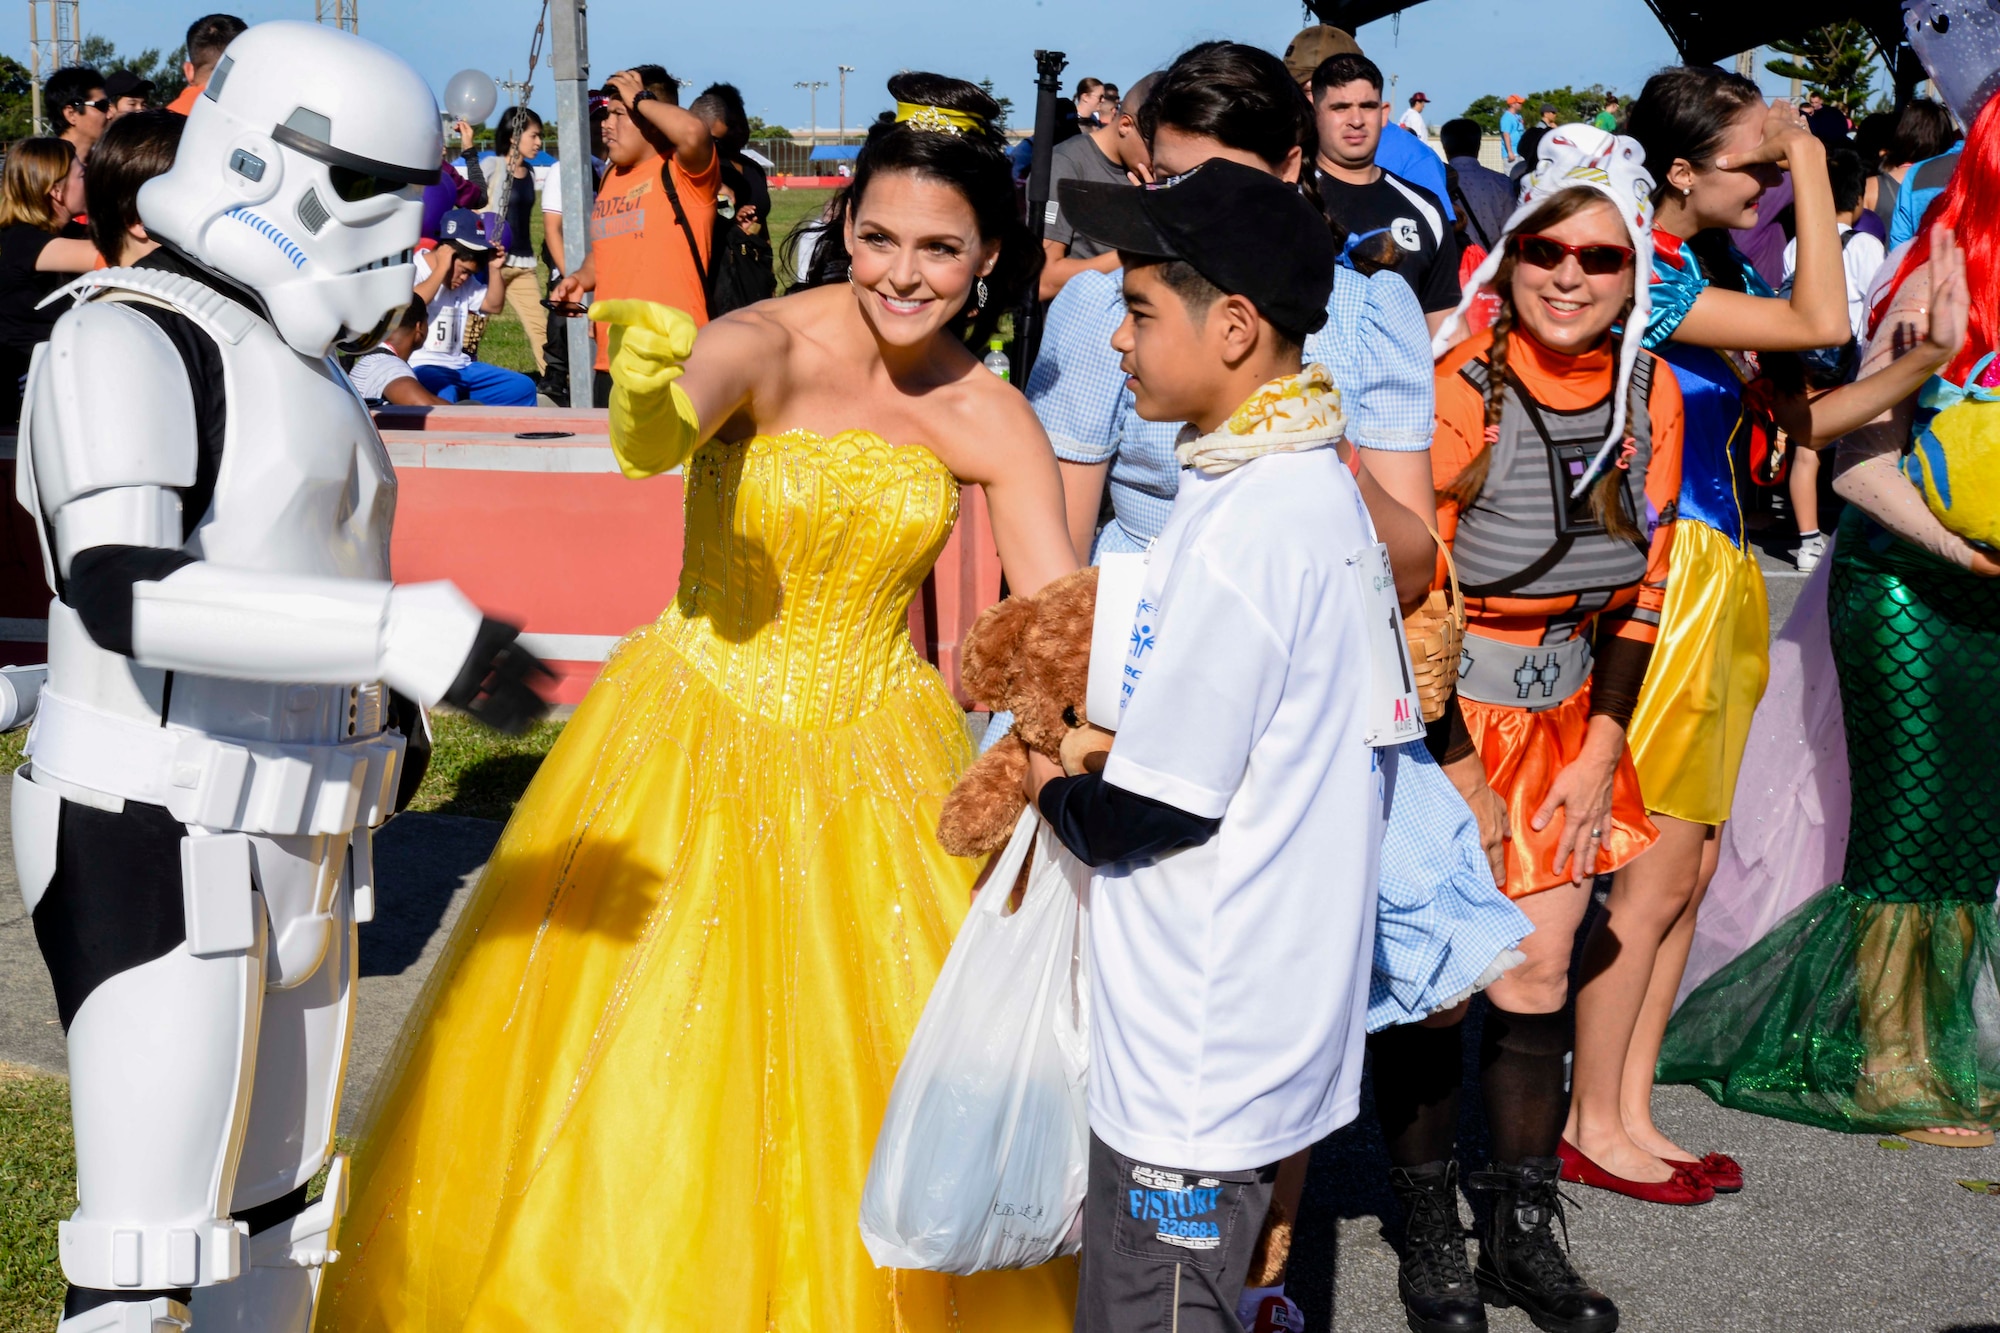 Volunteers dressed in costumes greet Kadena Special Olympics athletes as they make their way to the Risner Fitness Center Sports Complex Nov. 7, 2015, at Kadena Air Base, Japan. This year marks the 16th anniversary of KSO, a sporting event dedicated to enriching the lives of American and Okinawan special needs individuals on the island. (U.S. Air Force photo by Senior Airman John Linzmeier/Released) 